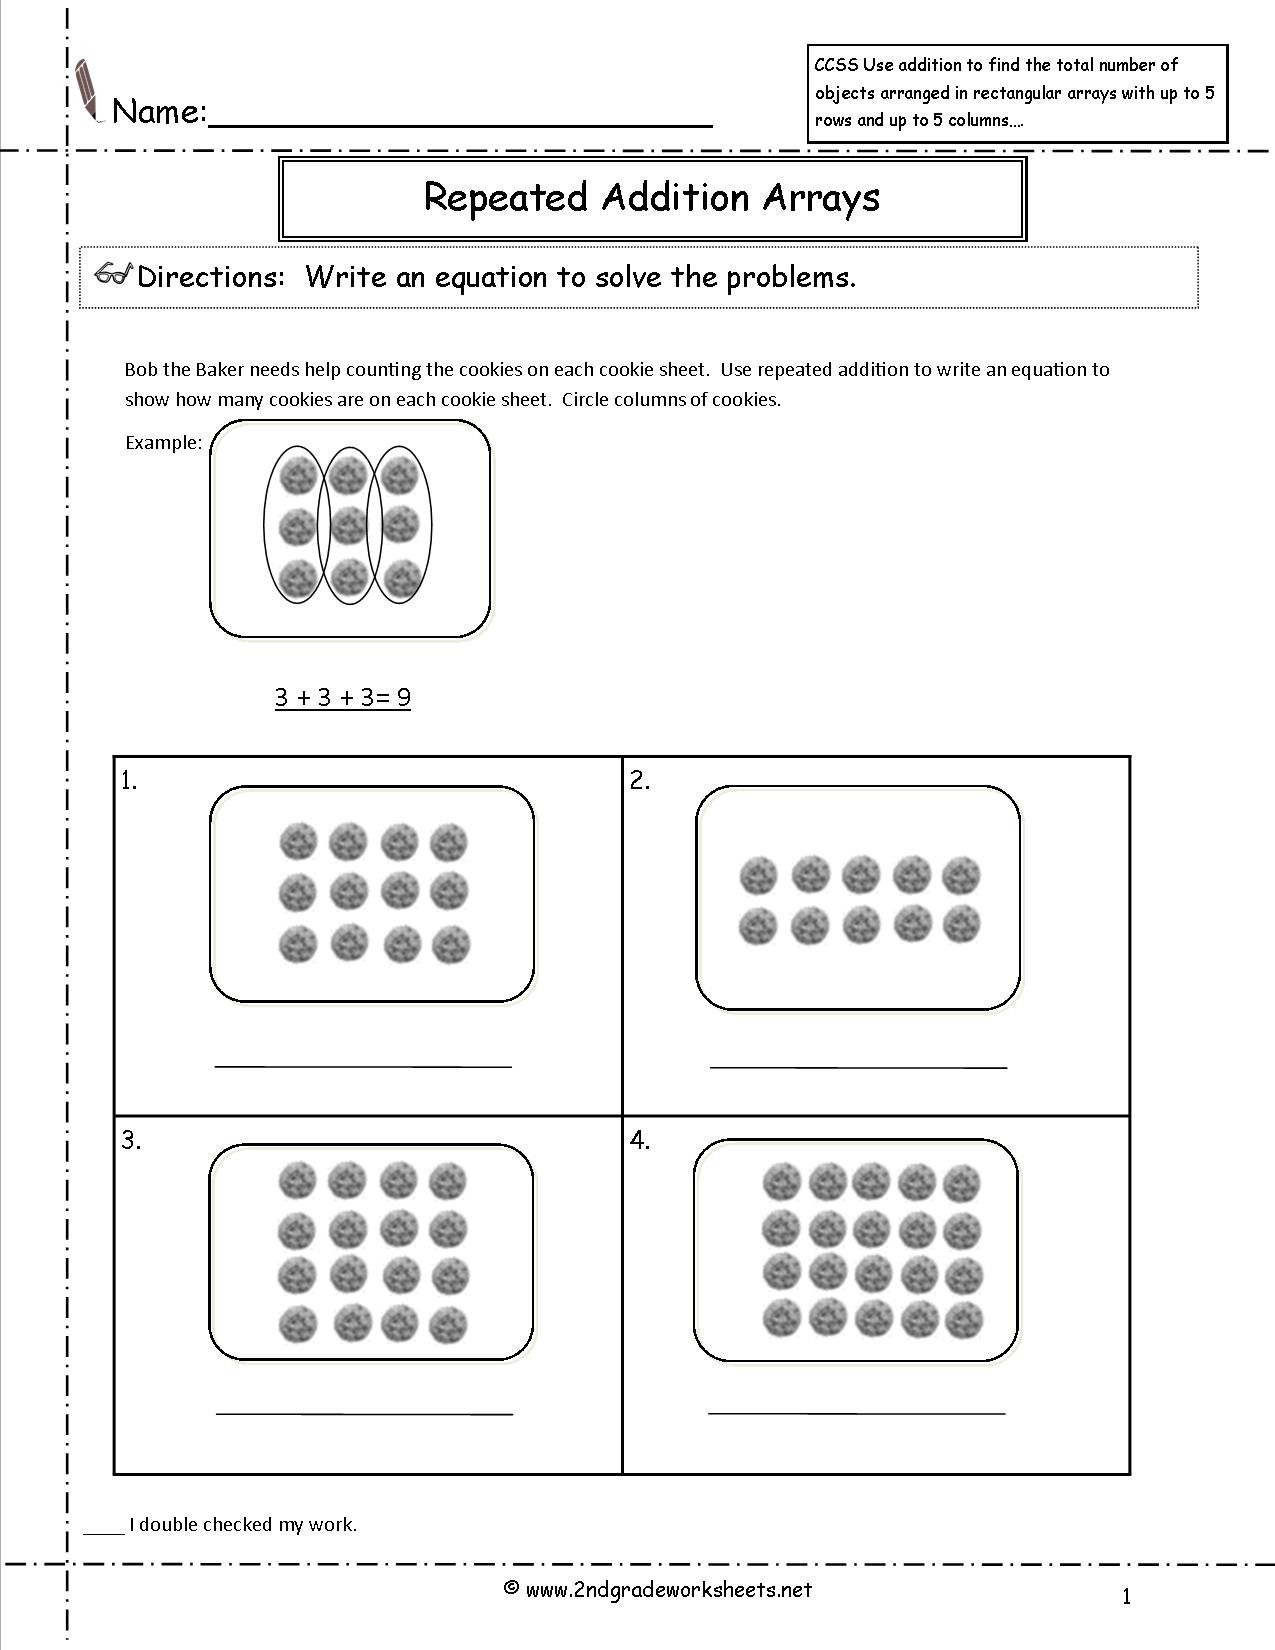 20-common-core-worksheets-by-grade-worksheets-decoomo